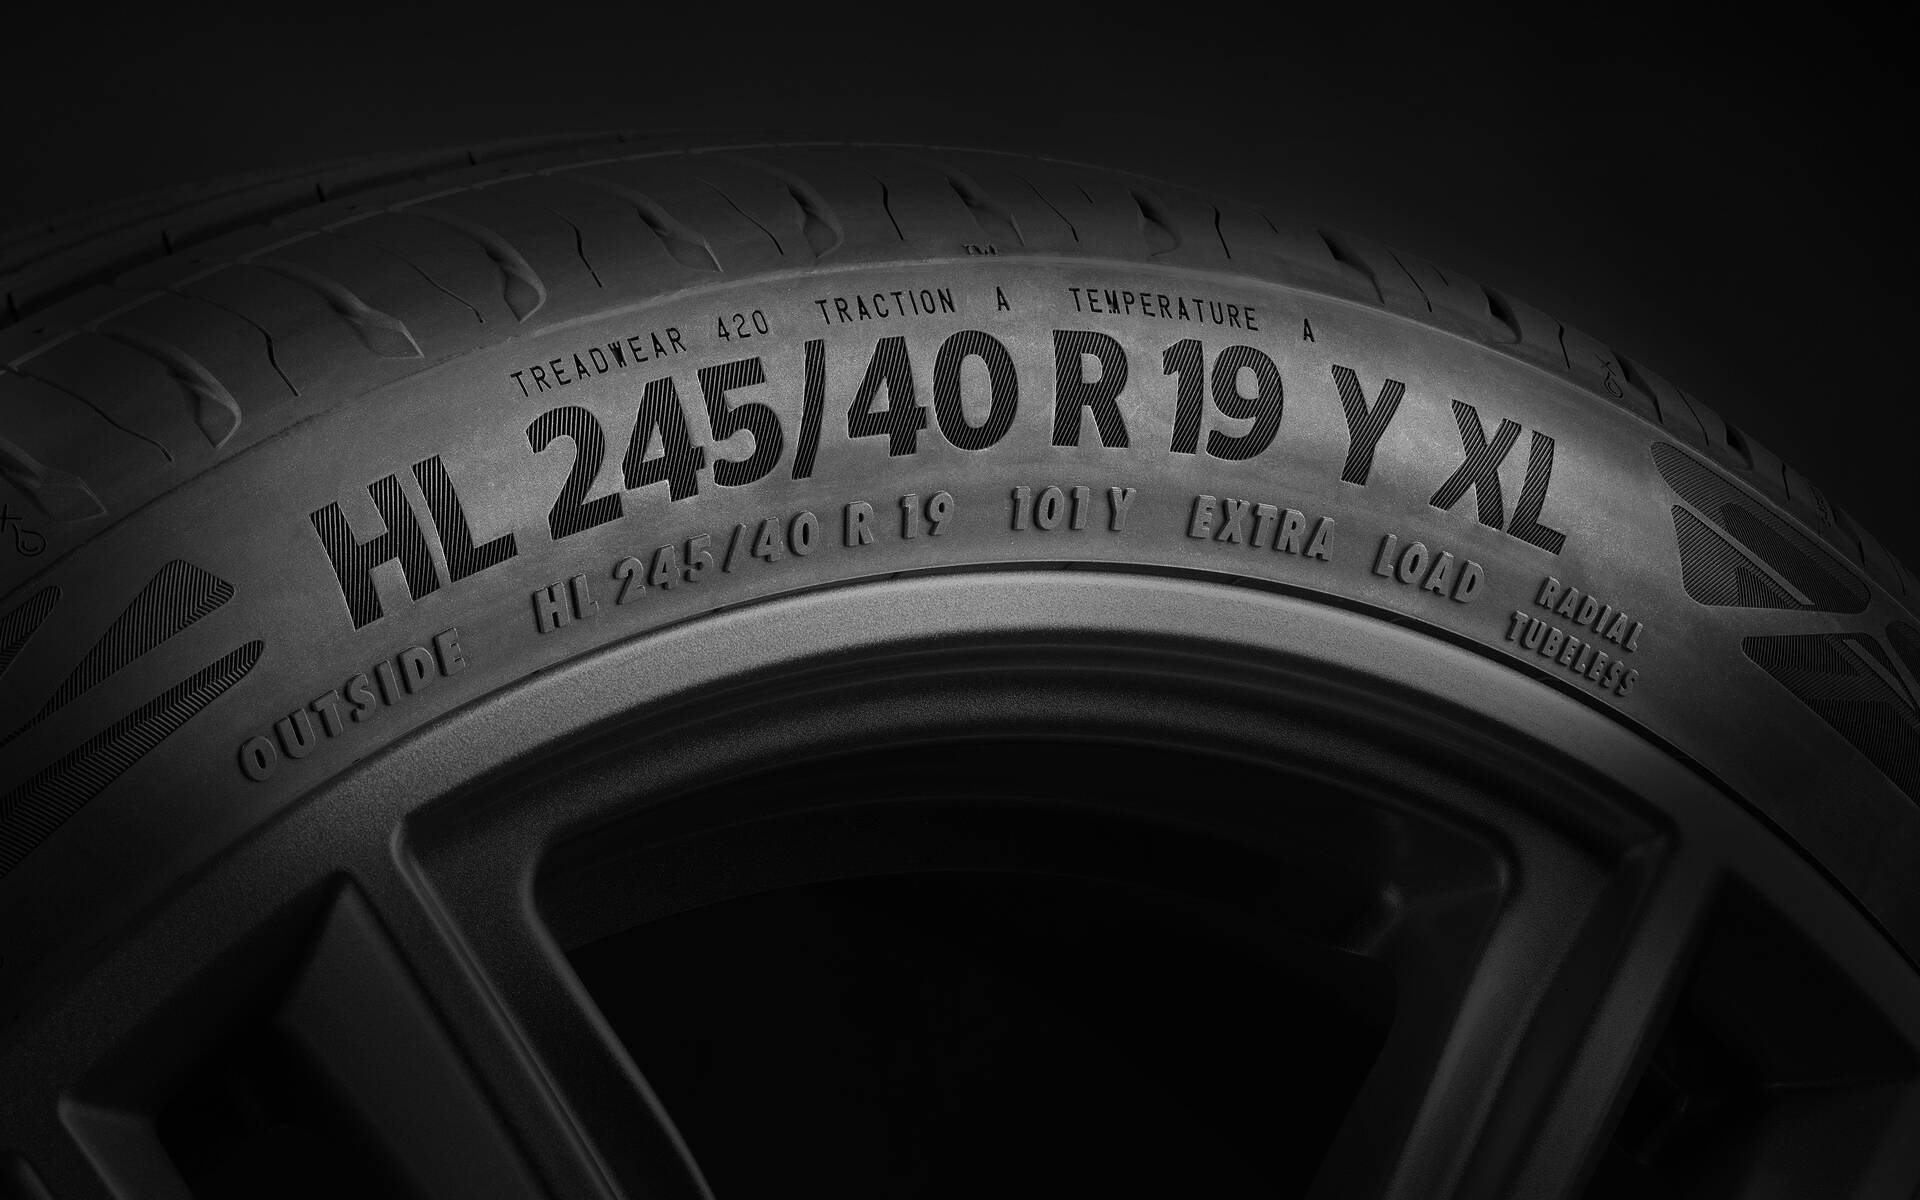 How tire speed ratings can affect the safety of your car.